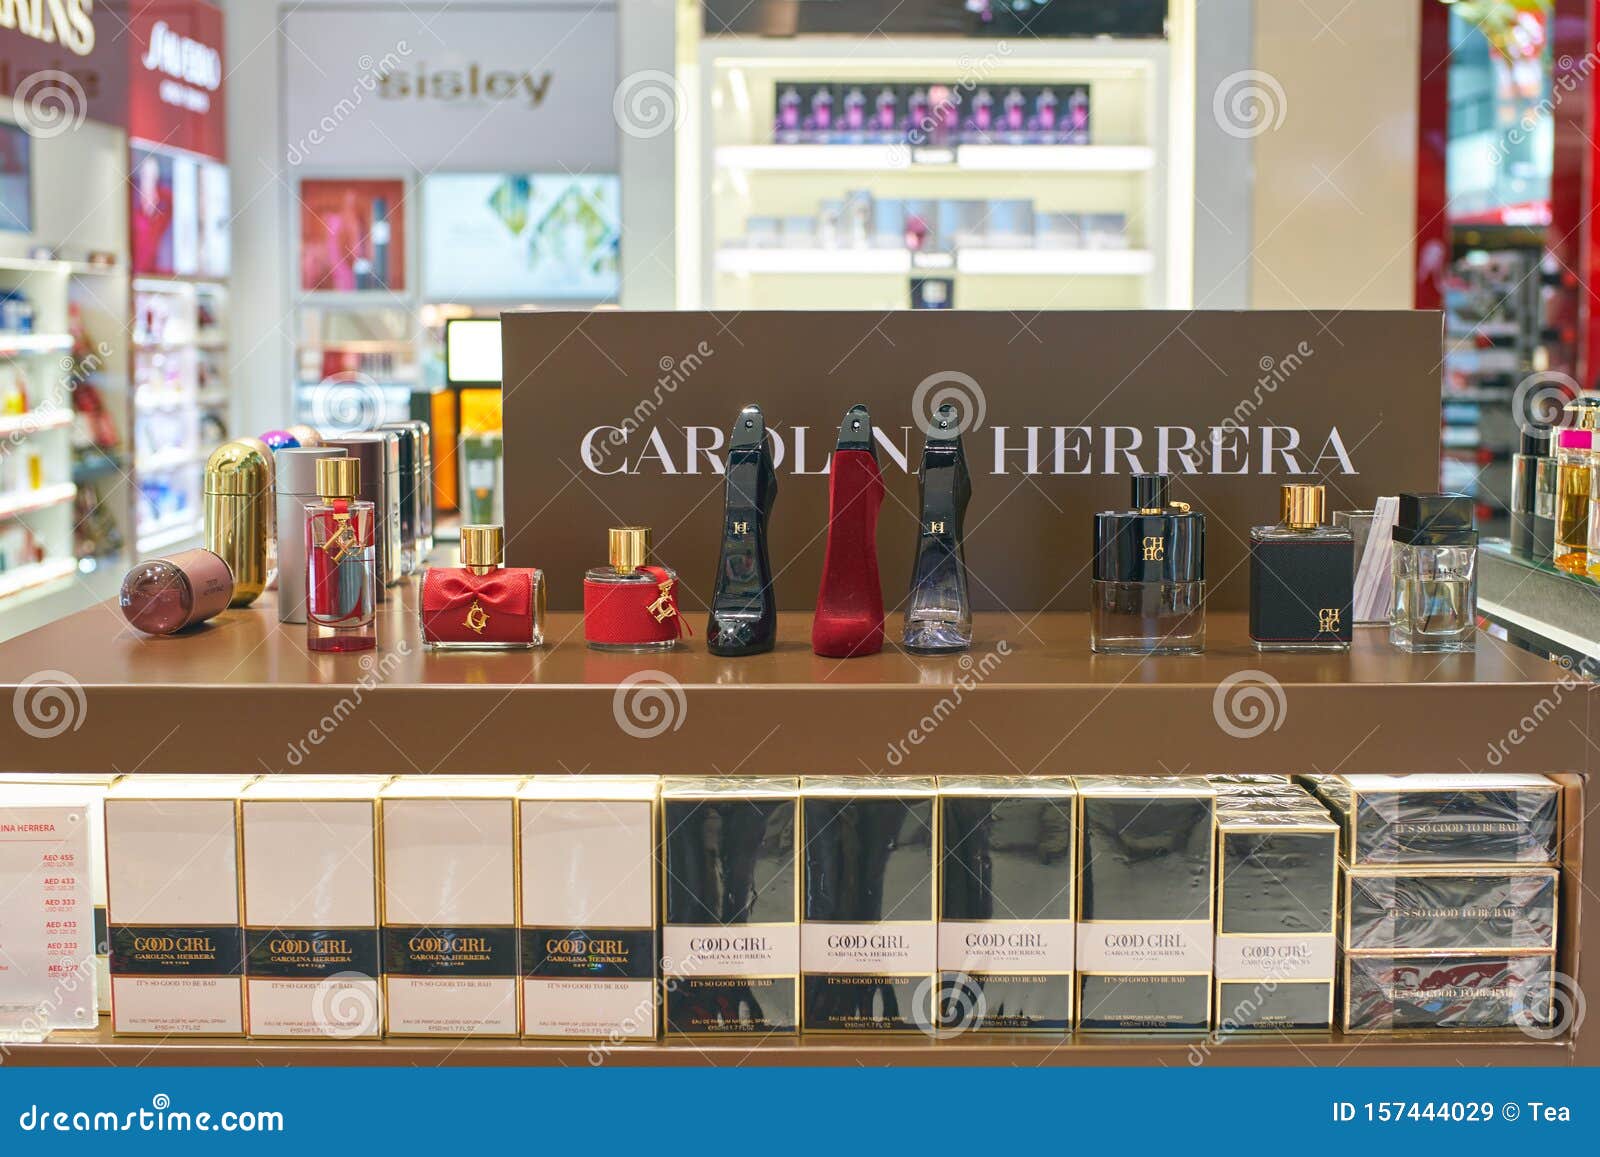 Duty Free editorial stock image. Image of dutyfree, editorial - 157444029